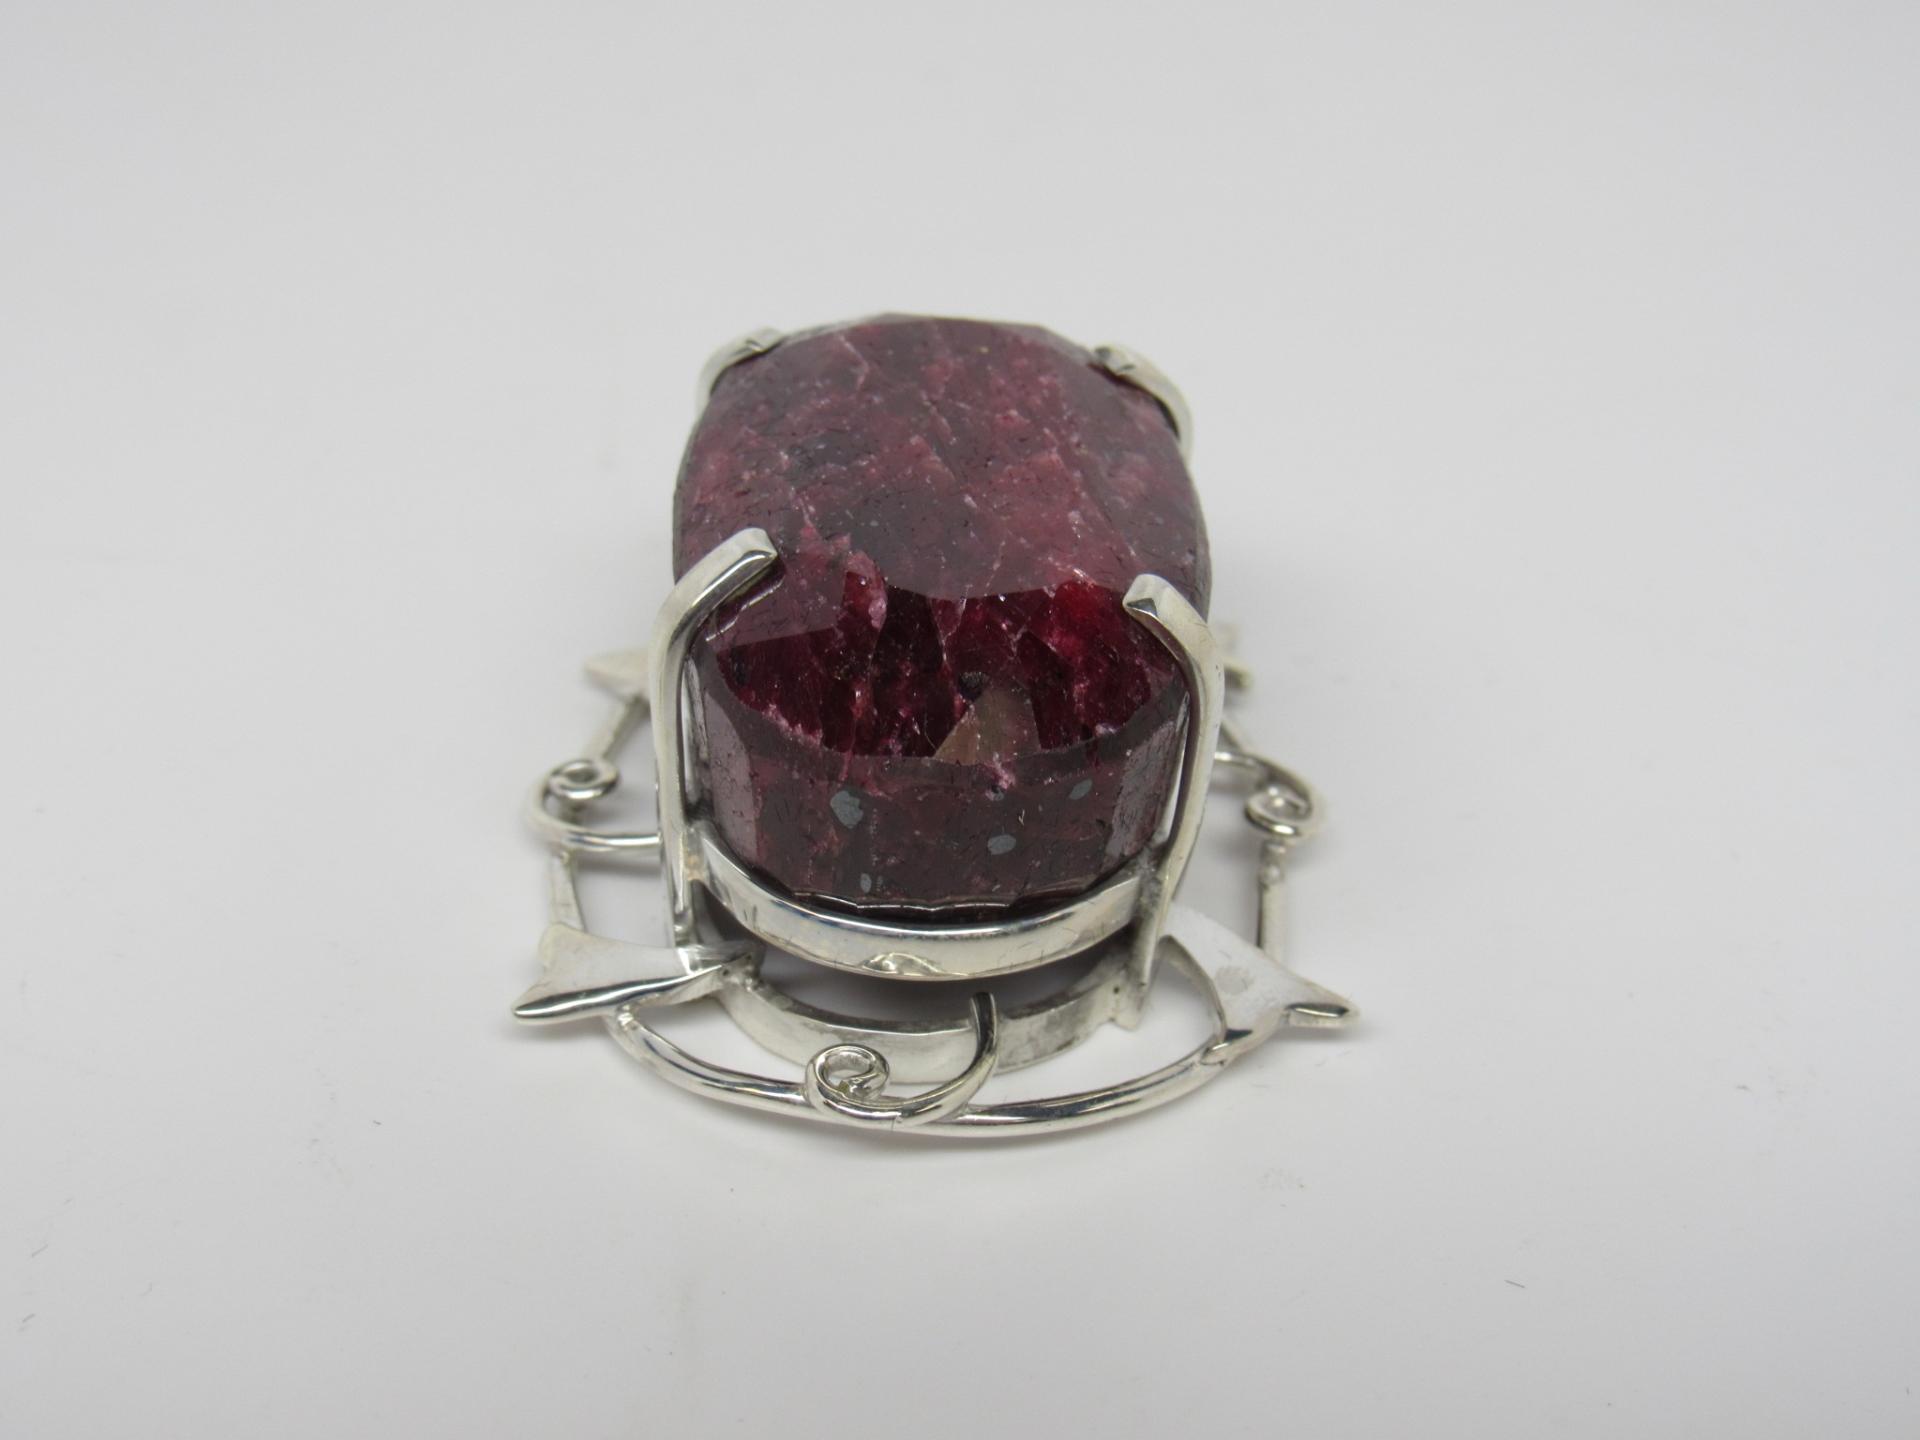 213.81 cts Ruby Pendant *Appraisal*